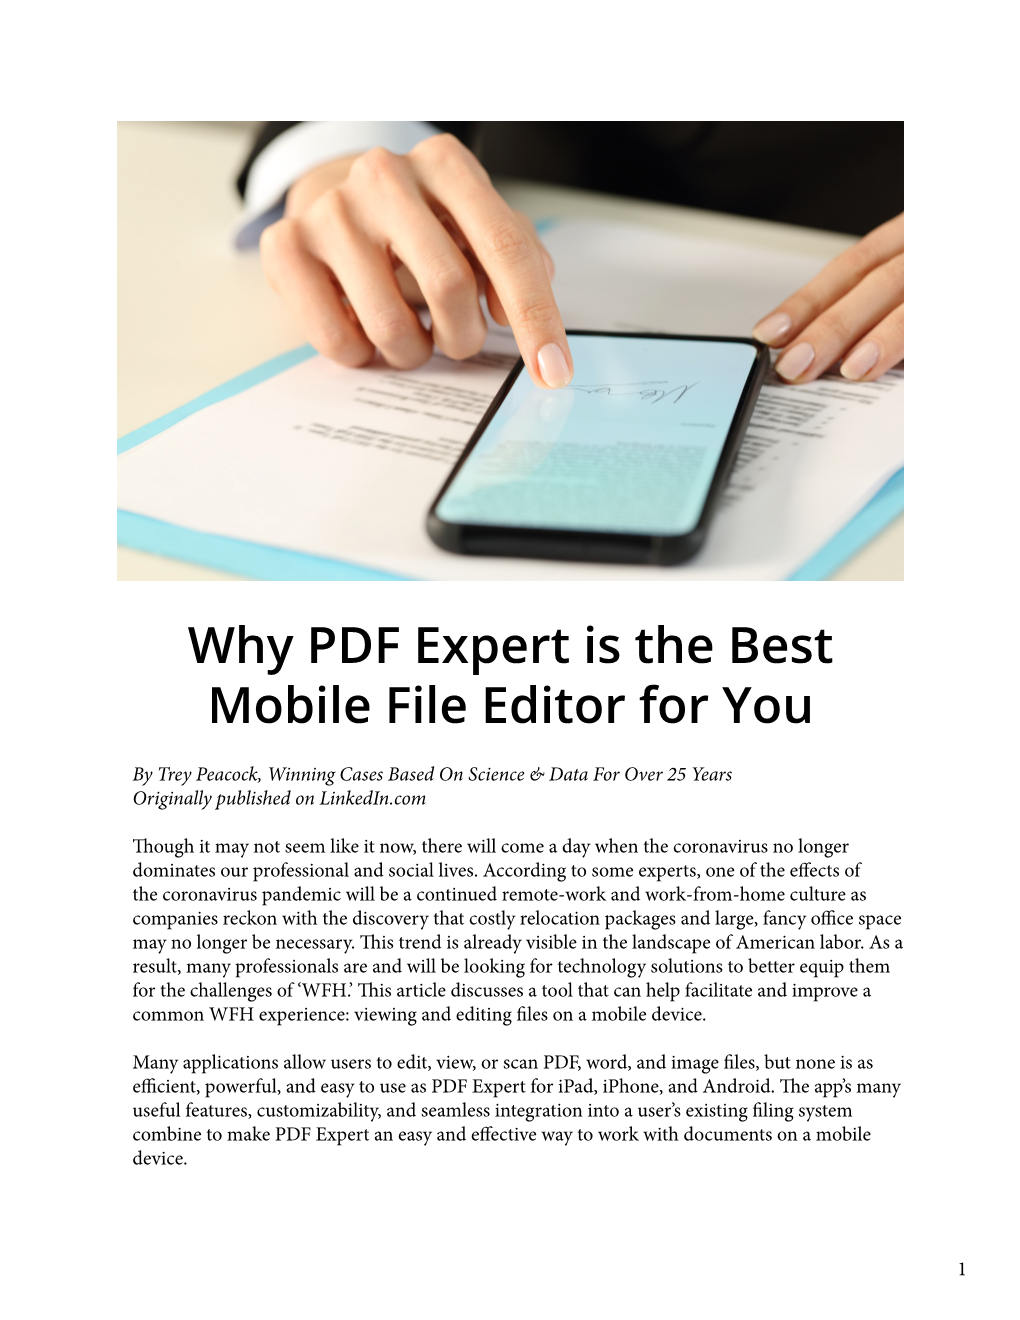 Why PDF Expert Is the Best Mobile File Editor for You